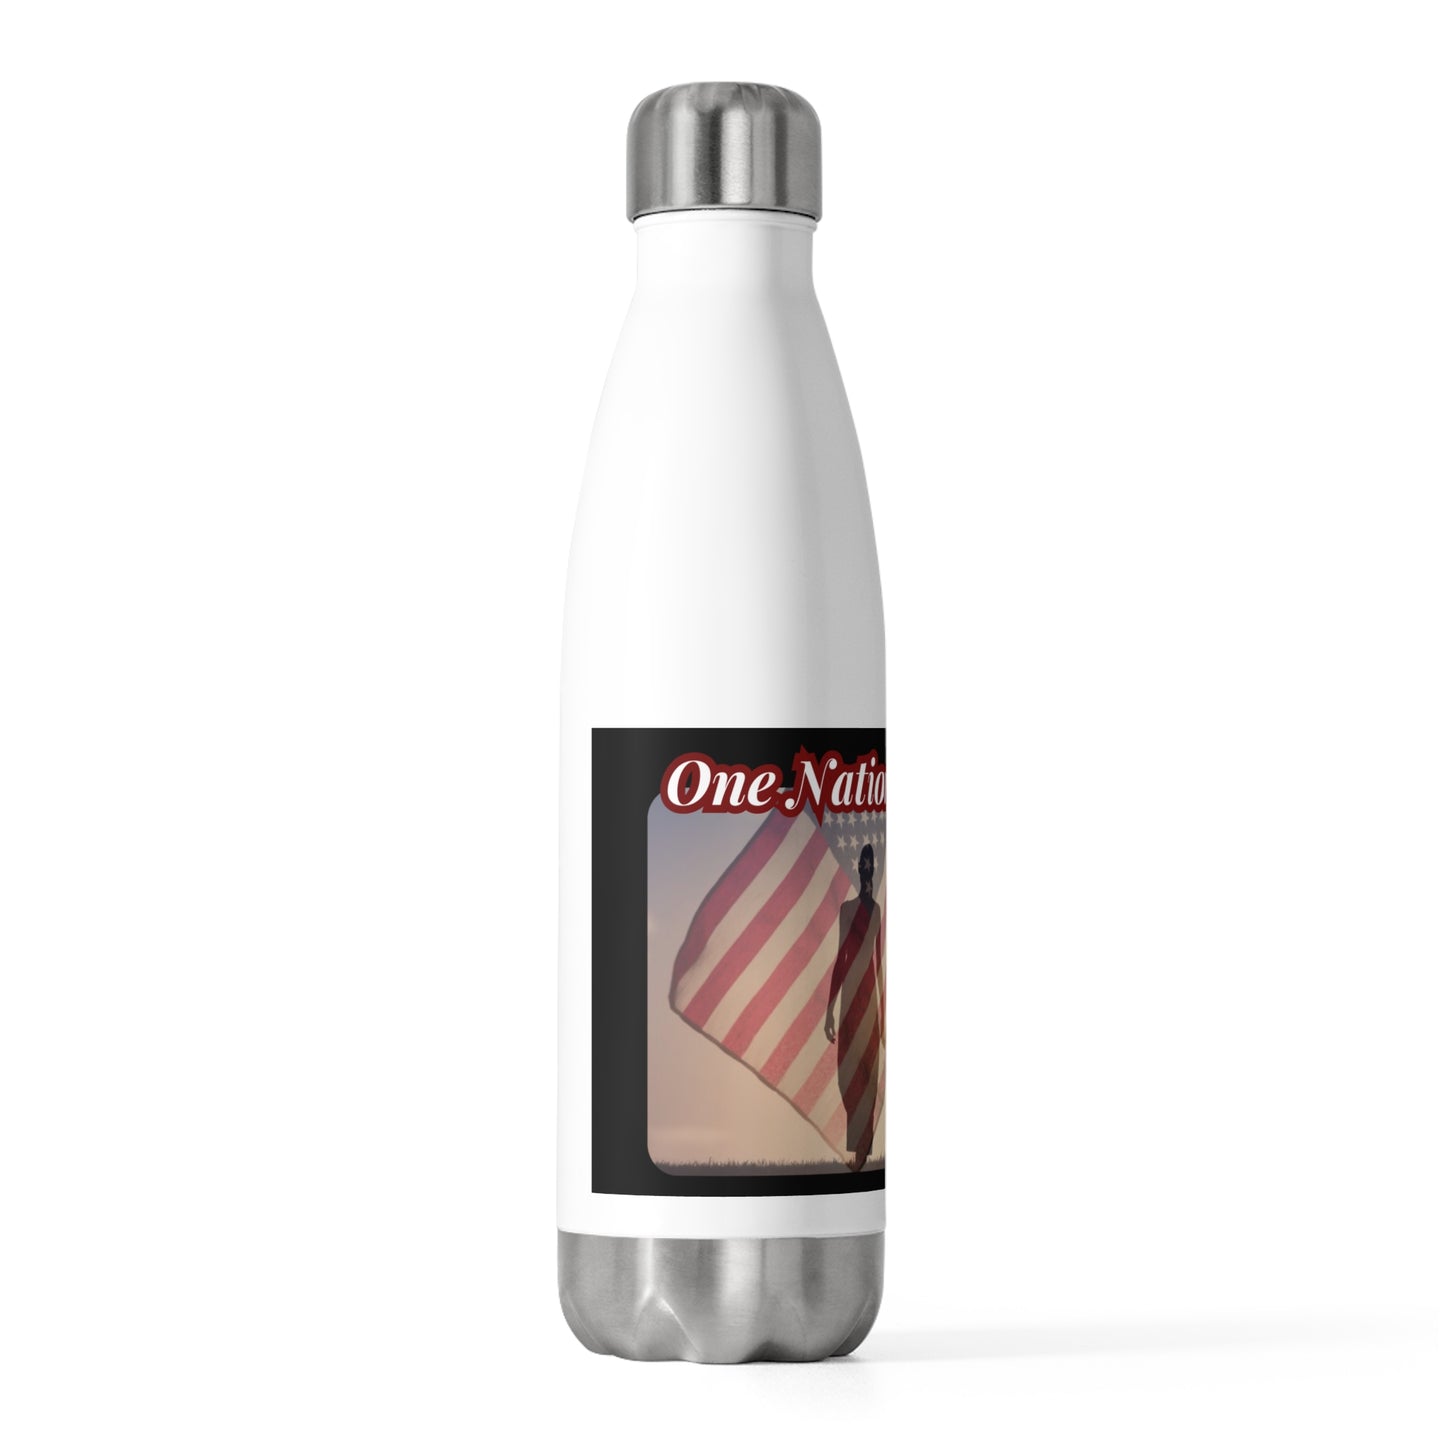 .ONE NATION UNDER GOD:  20oz Double Insulated Patriotic Water Bottle - FREE SHIPPING